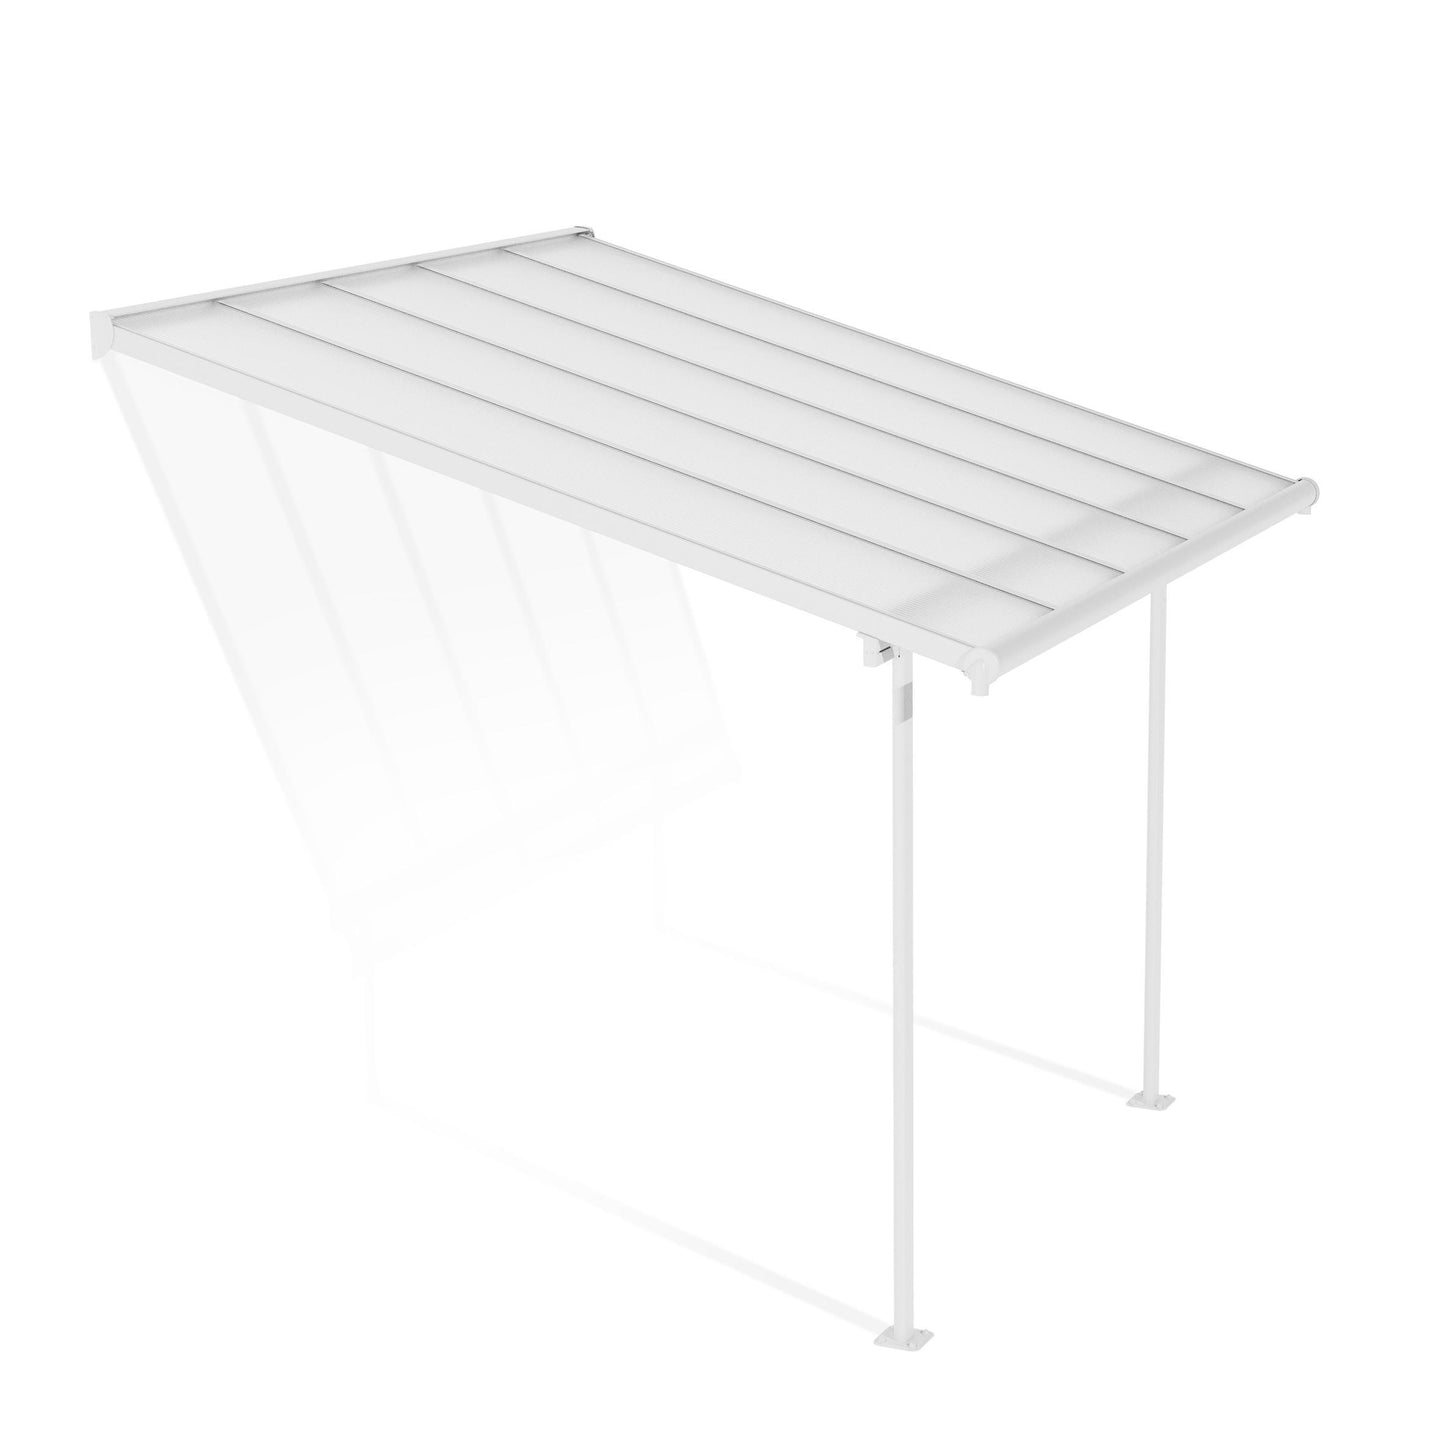 Canopia by Palram 3 x 3.05 Sierra Patio Cover - White